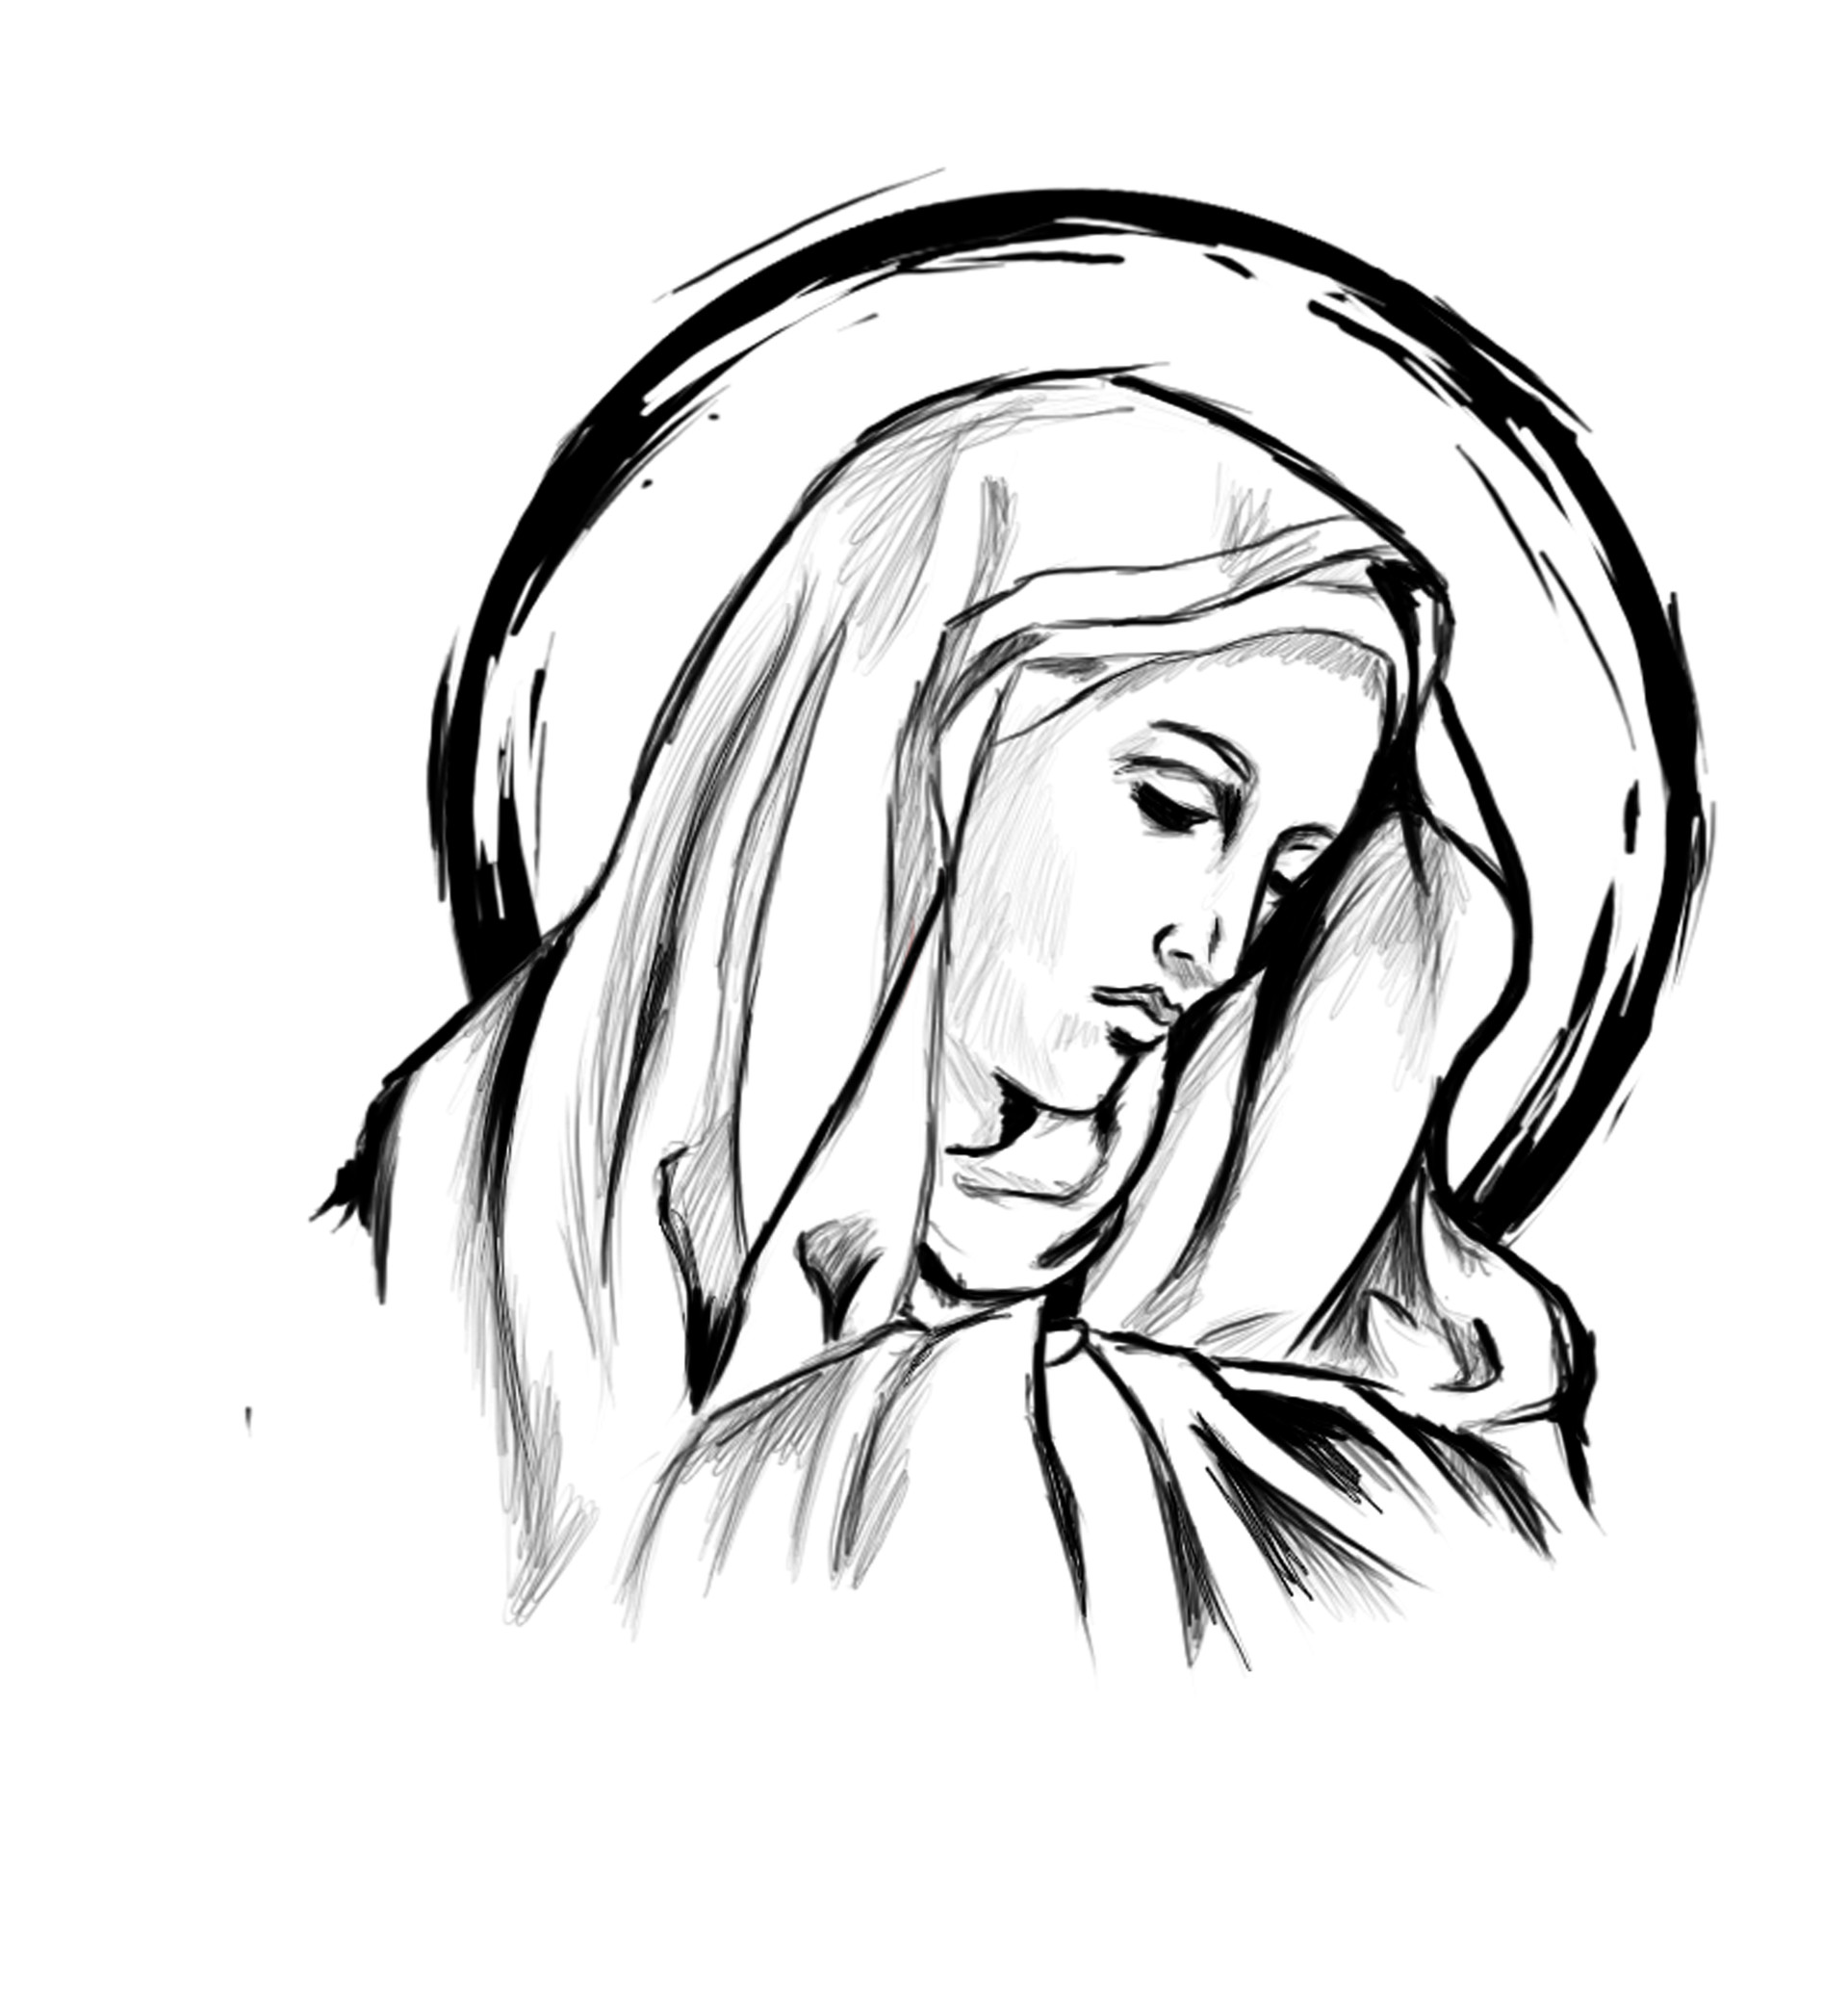 HEAD OF THE VIRGIN MARY MOTHER OF JESUS SKETCH PAINTING ART REAL CANVAS  PRINT | eBay